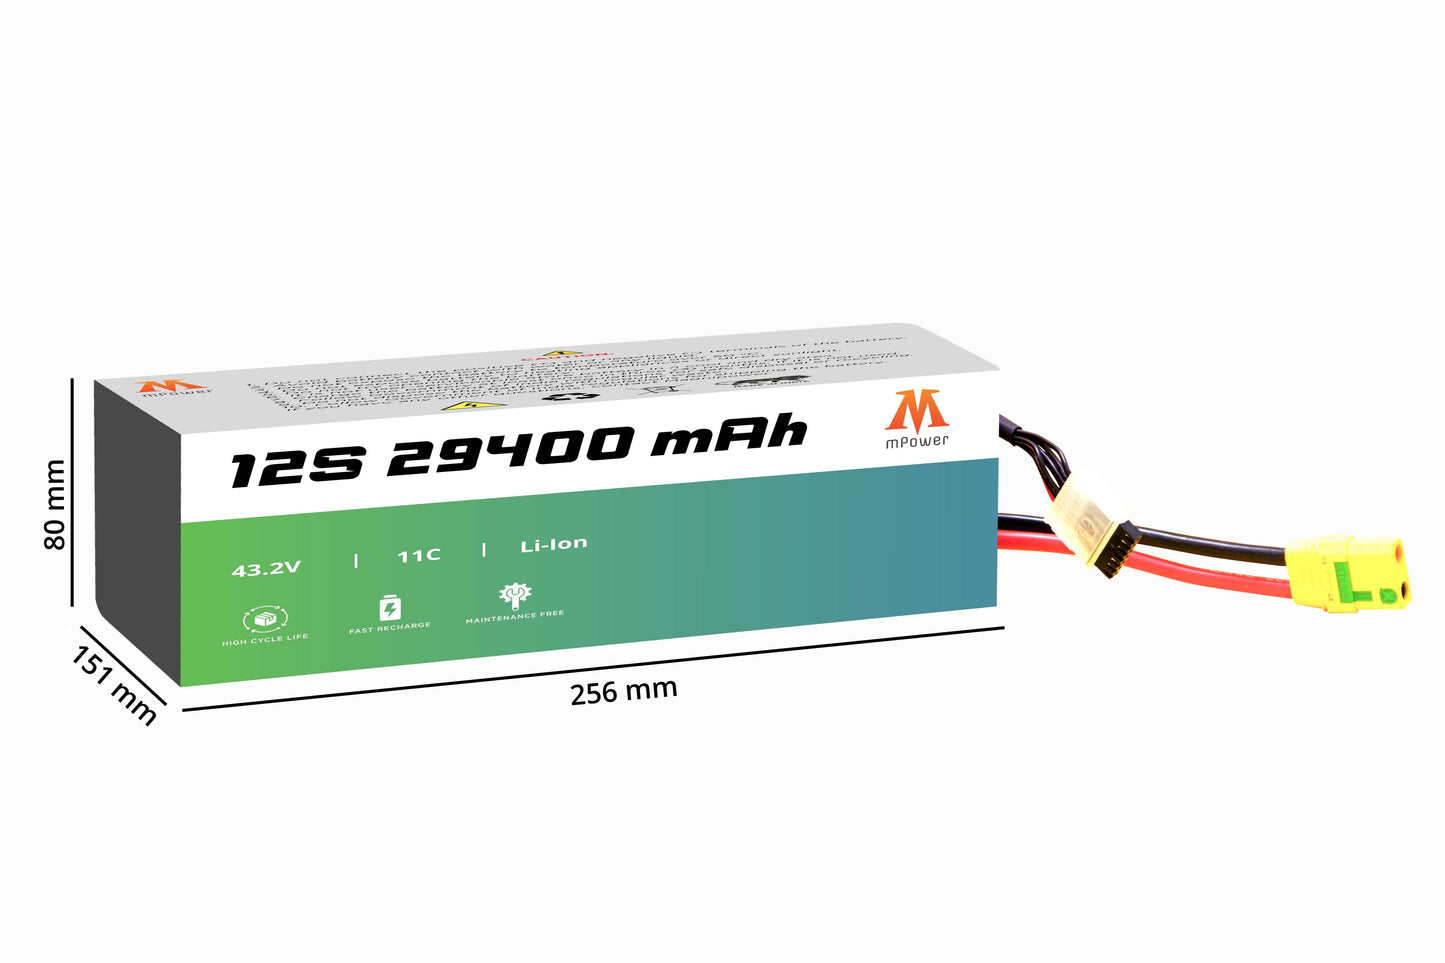 mPower 12S 29400mAh Lithium-Ion Battery for Agricultural Spraying Drones